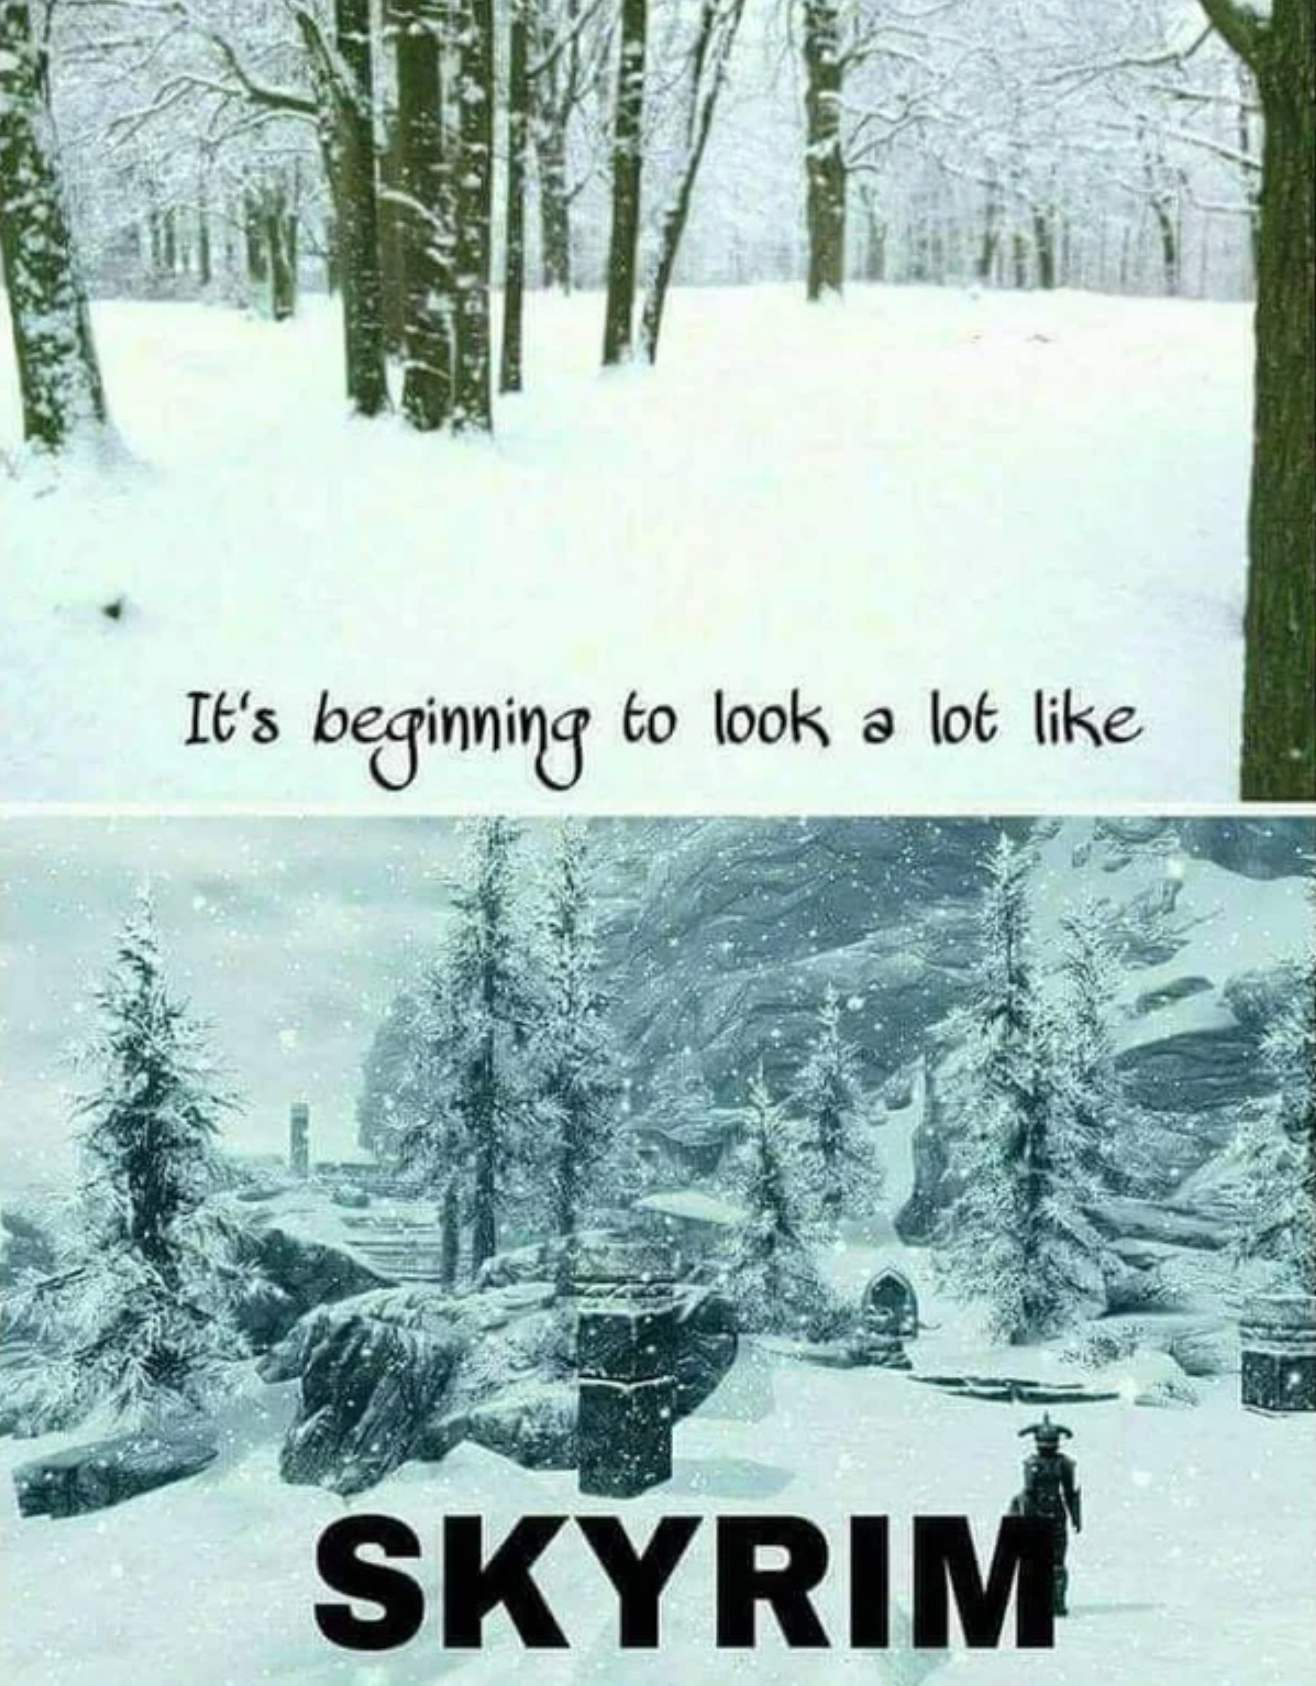 gaming memes and pics - its beginning to look a lot like skyrim - It's beginning to look a lot Skyrim